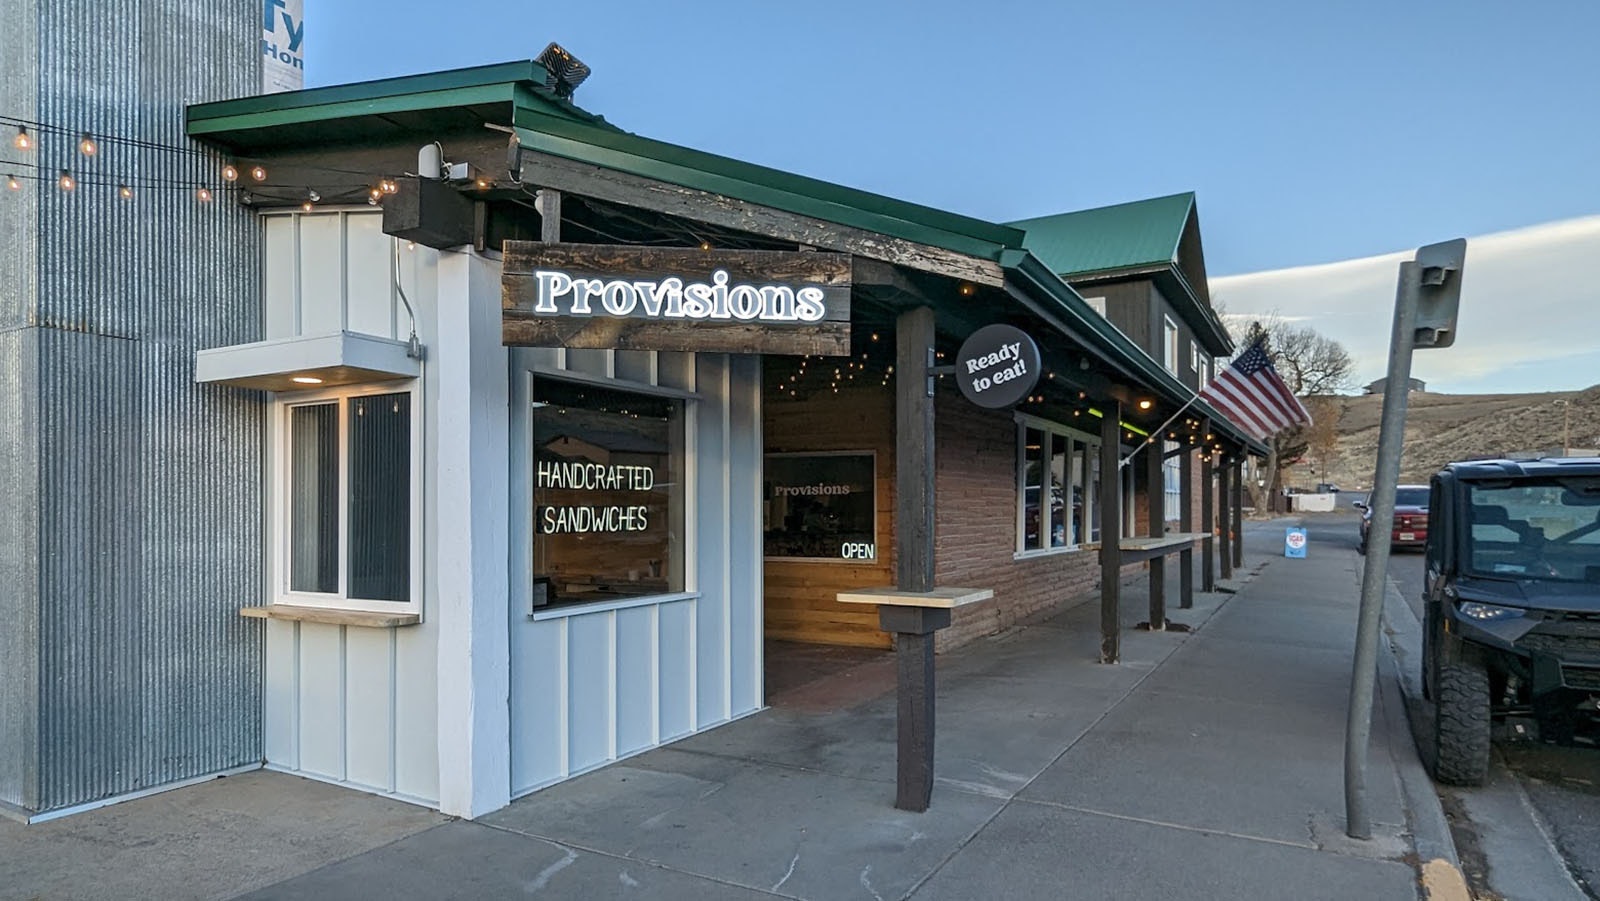 Provisions is new retail space that's opened in part of the Stringer Hotel complex in Dubois, along with an ice cream and sandwich shop.